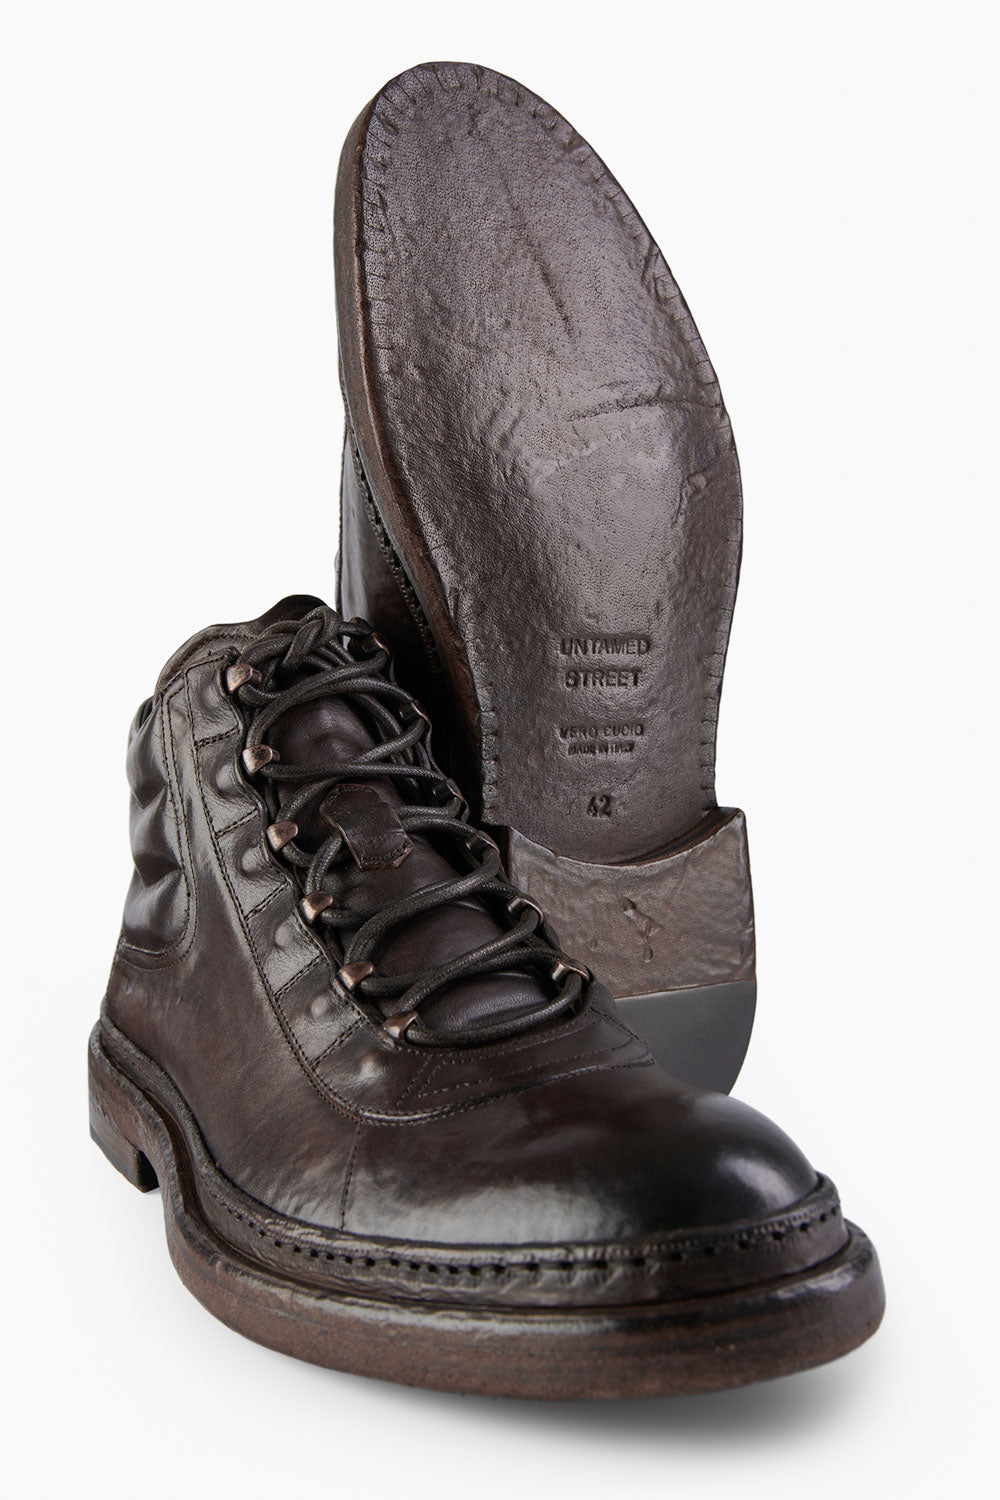 YORK rich-cocoa urban hiker welted boots.